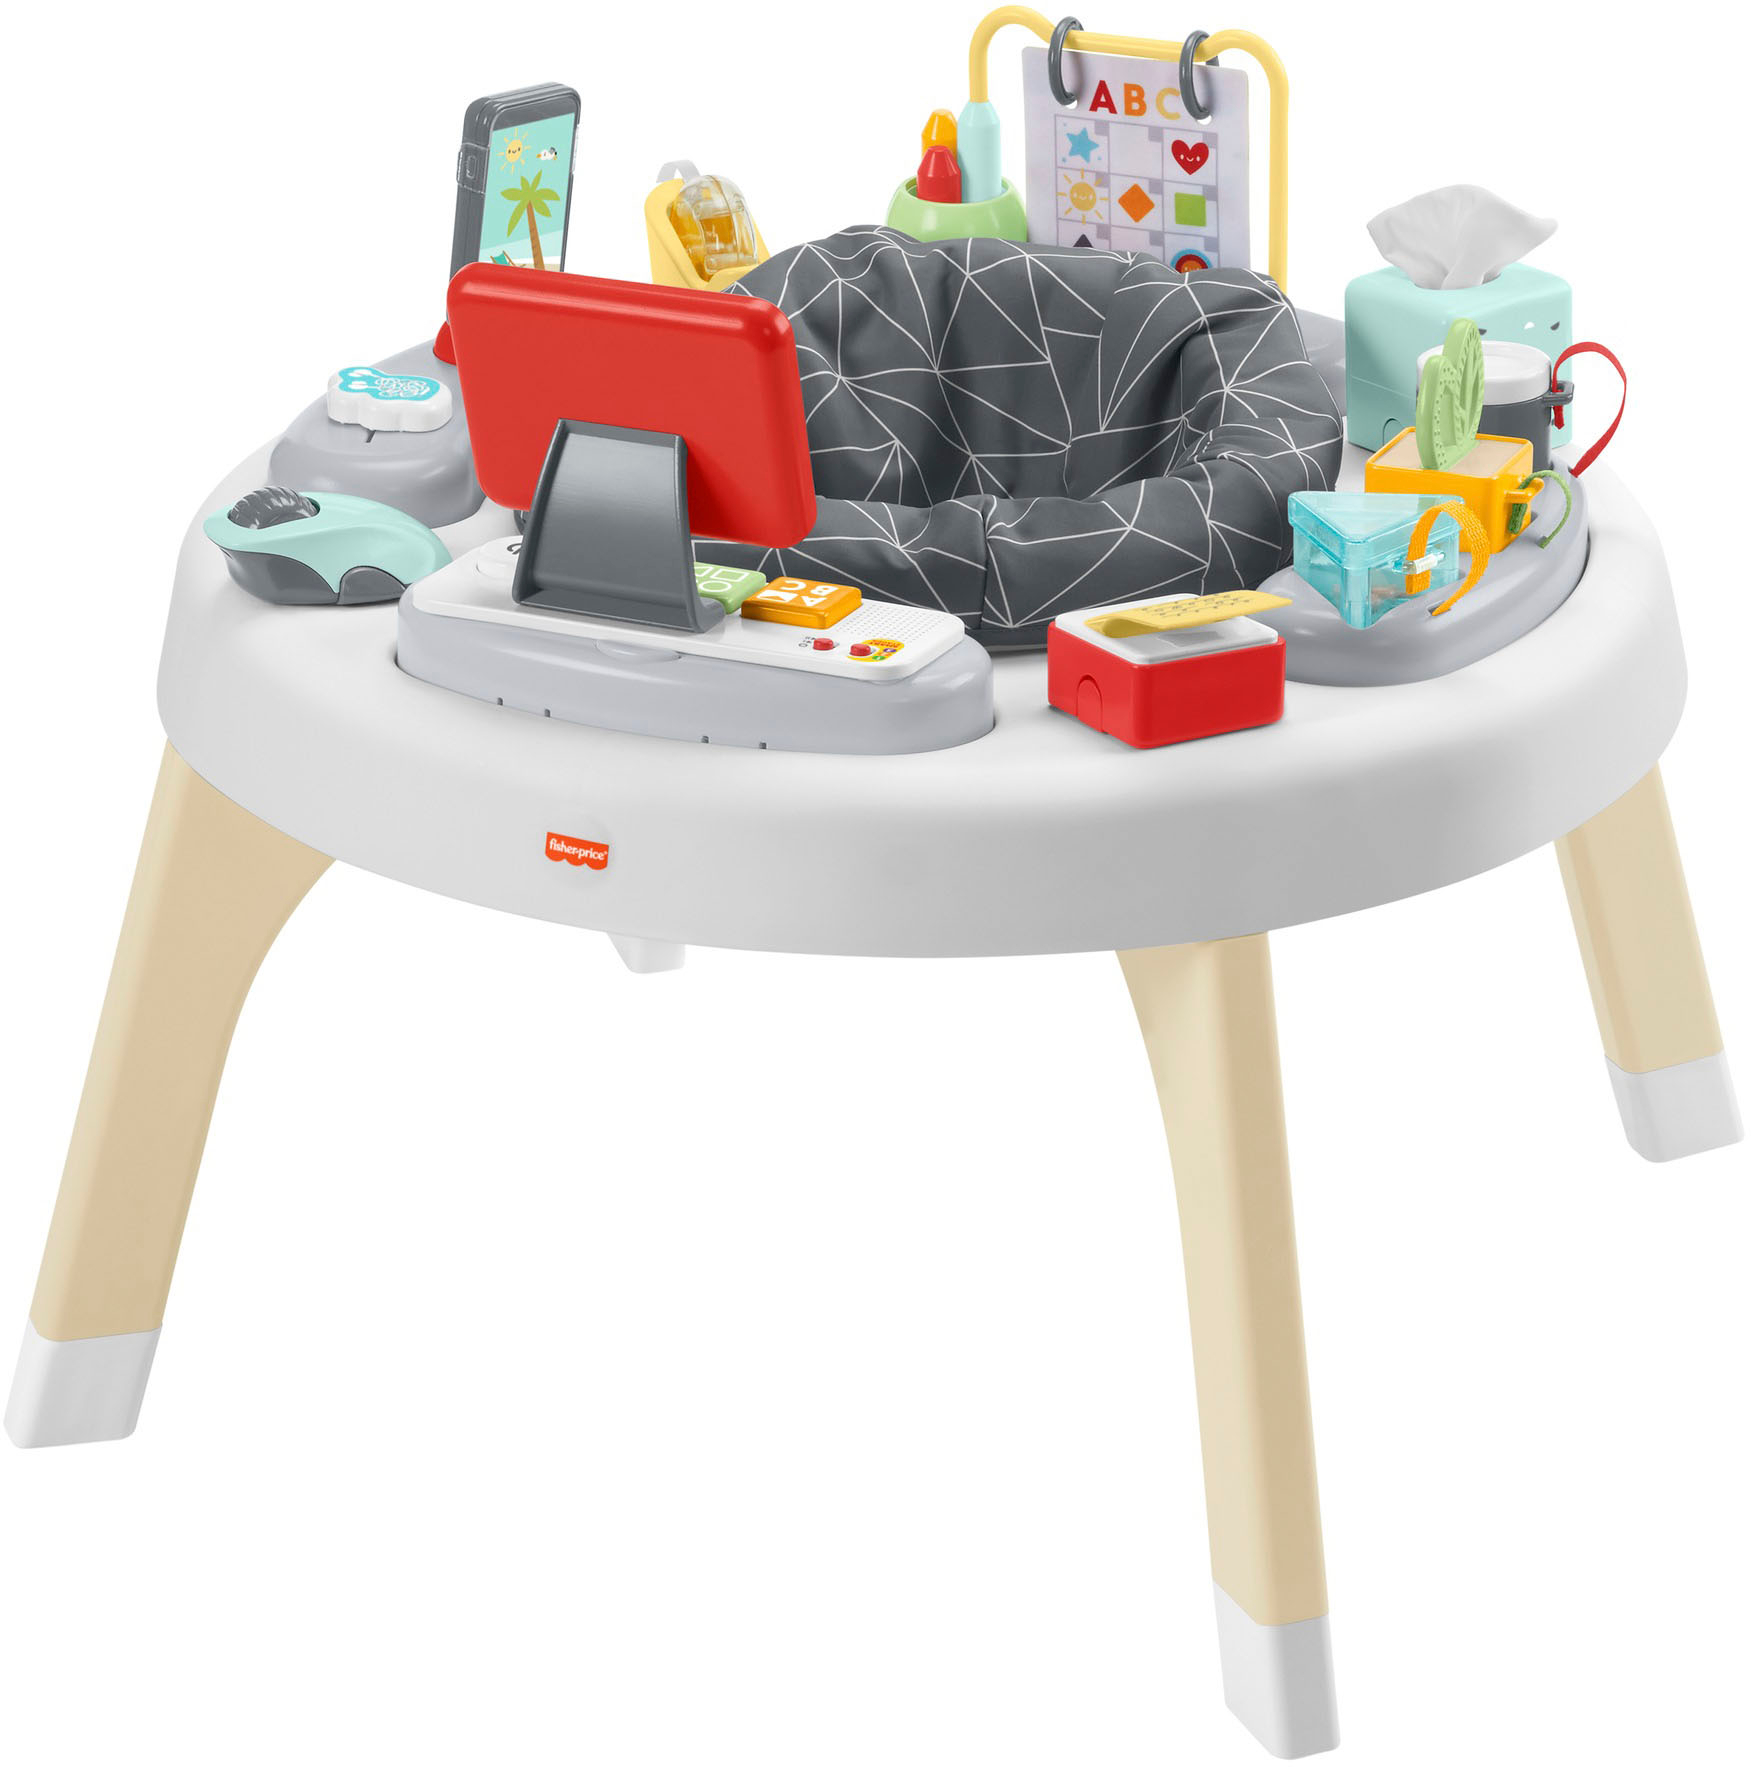 Fisher-Price 2-in-1 Like a Boss Activity Center HDX97 Best Buy